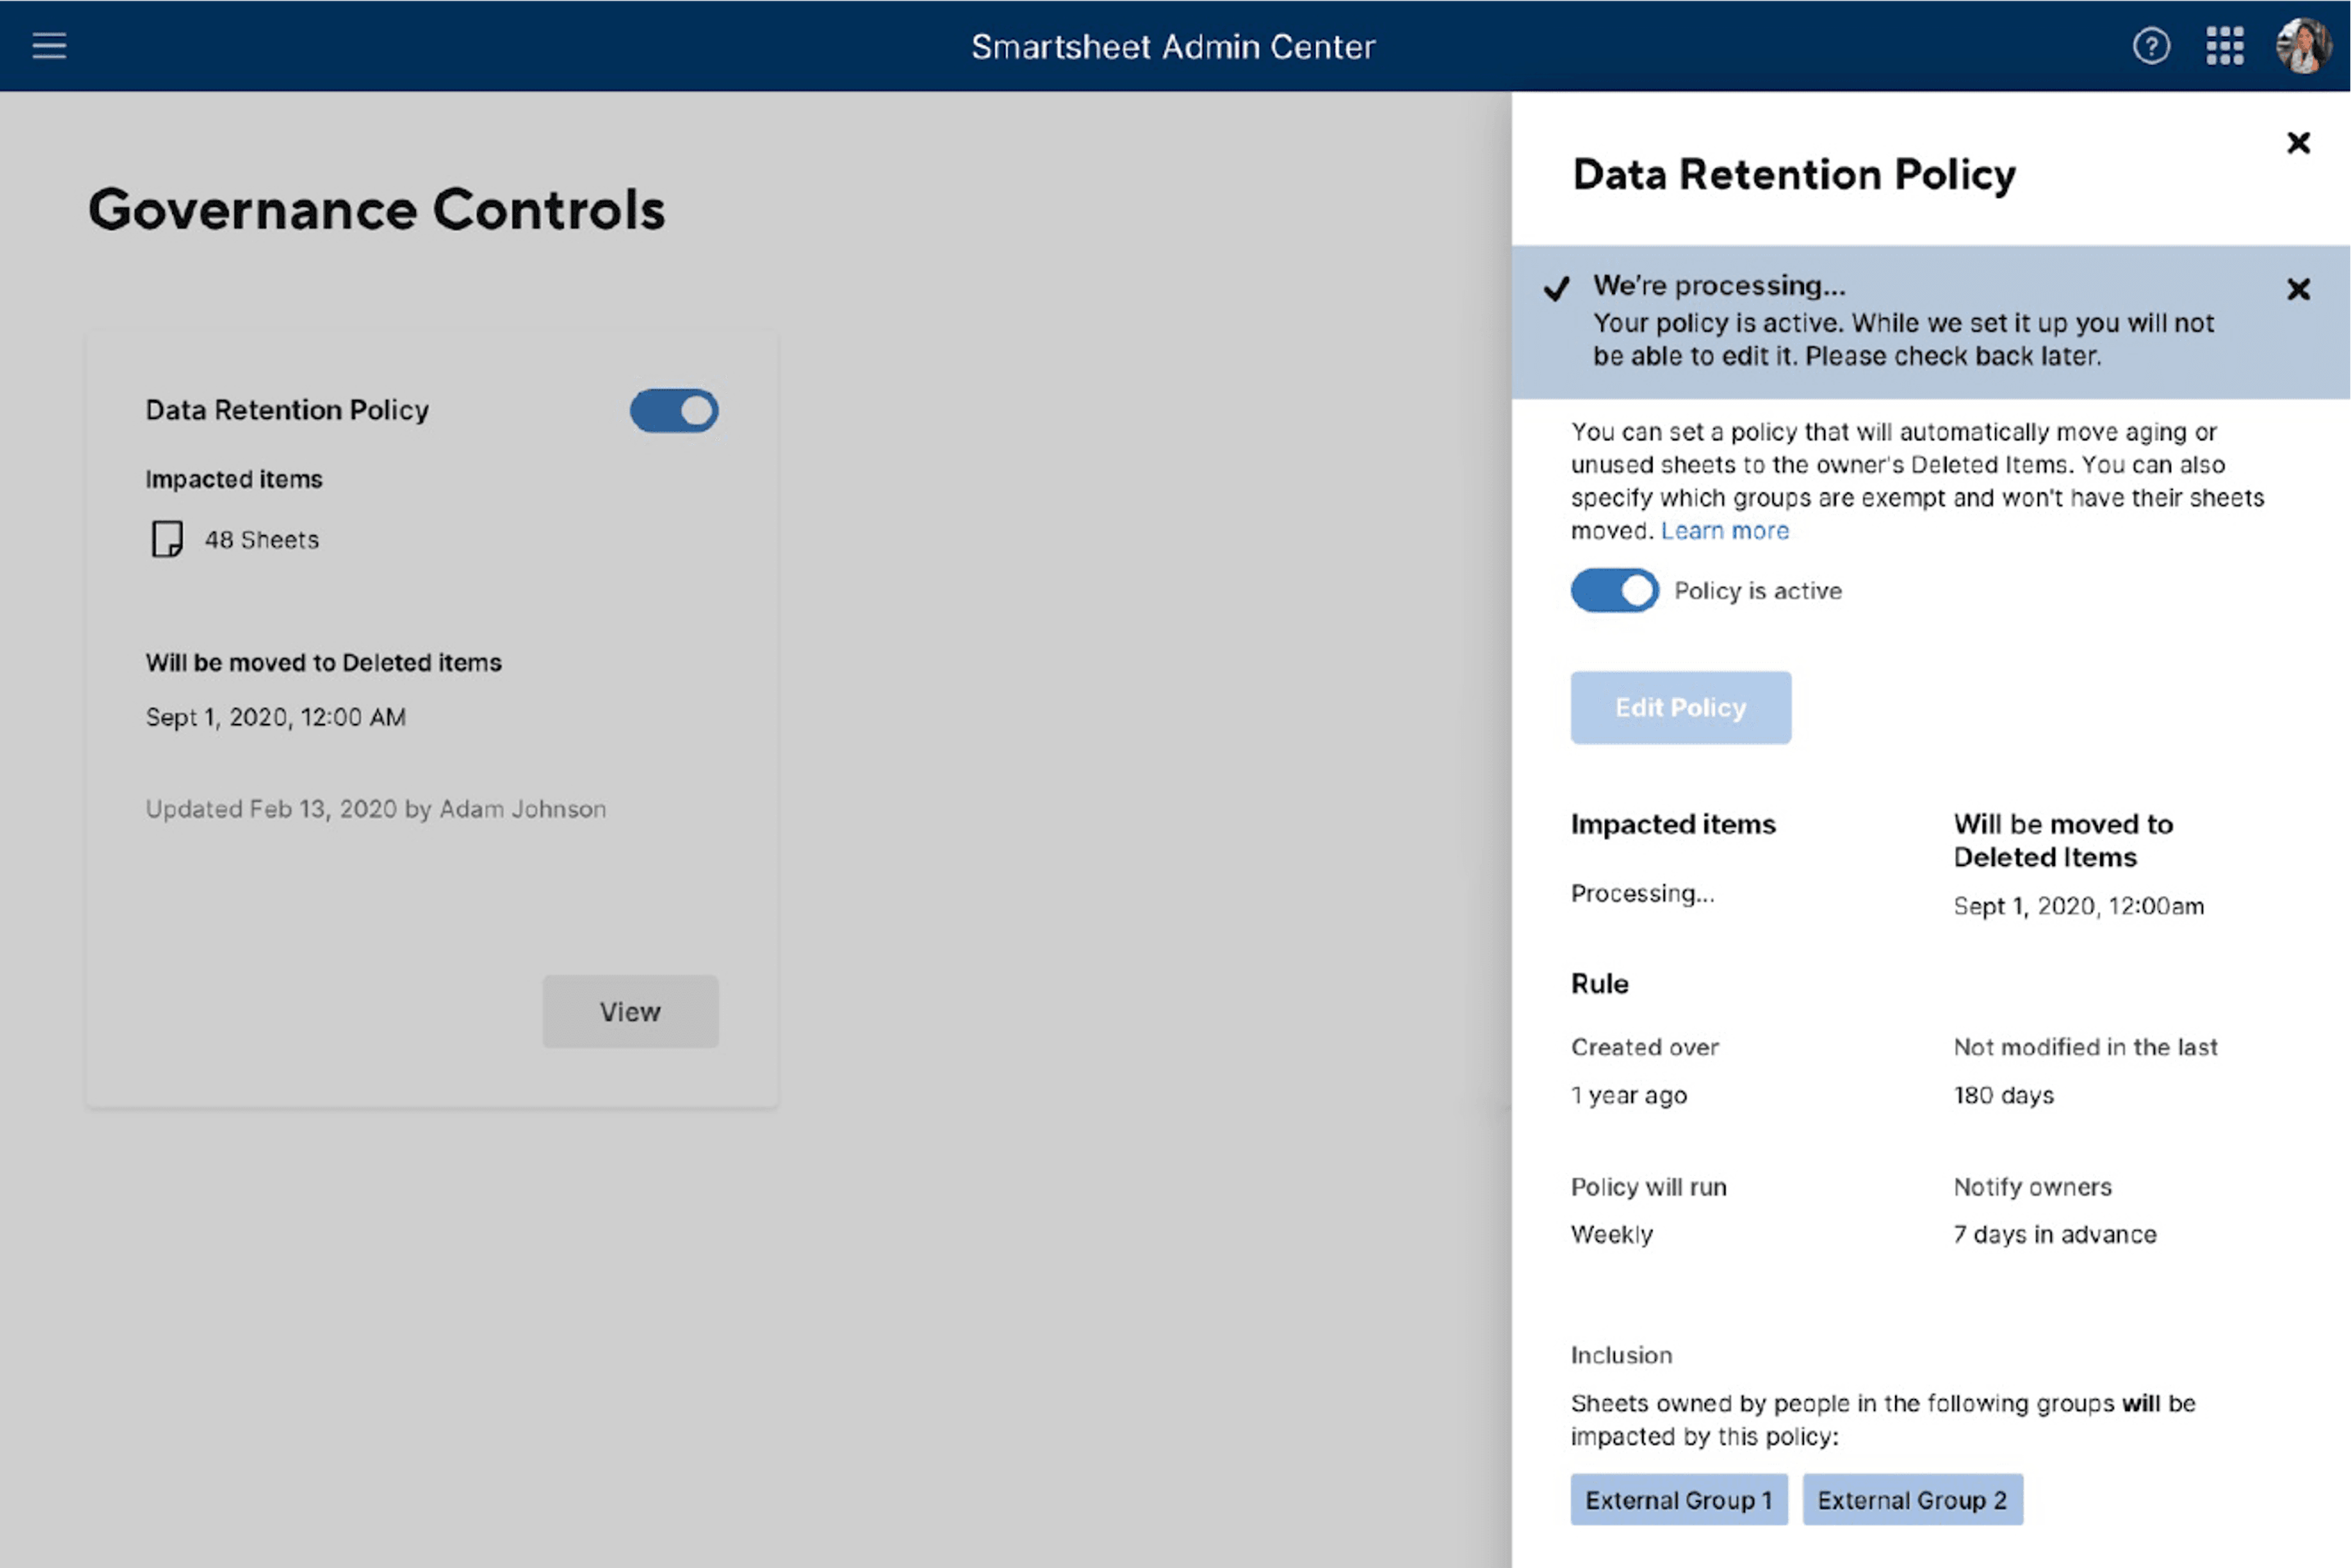 Smartsheet_Data_Retention_Policy_1998497e84.png?